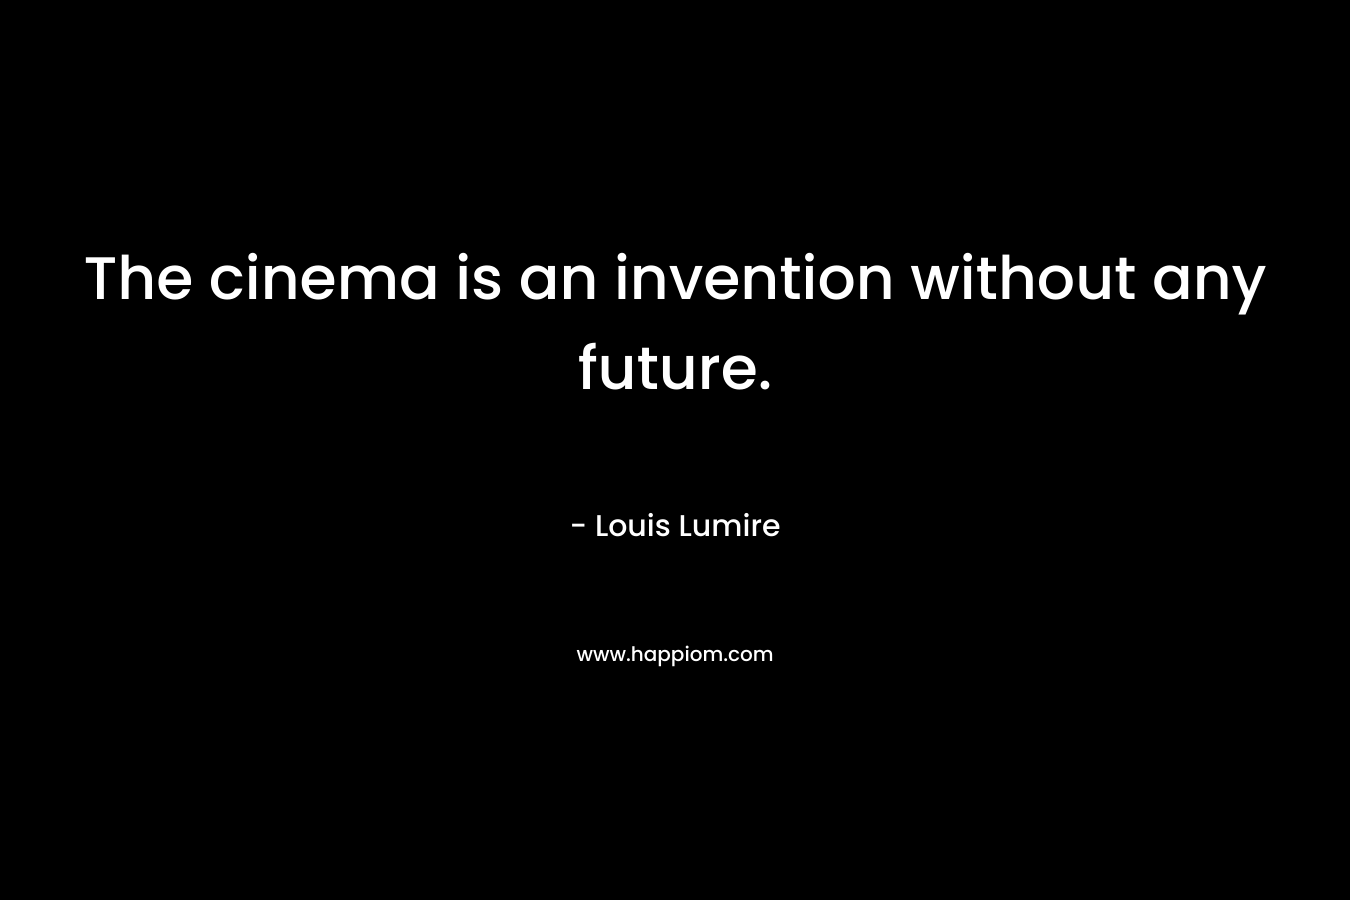 The cinema is an invention without any future. – Louis Lumire